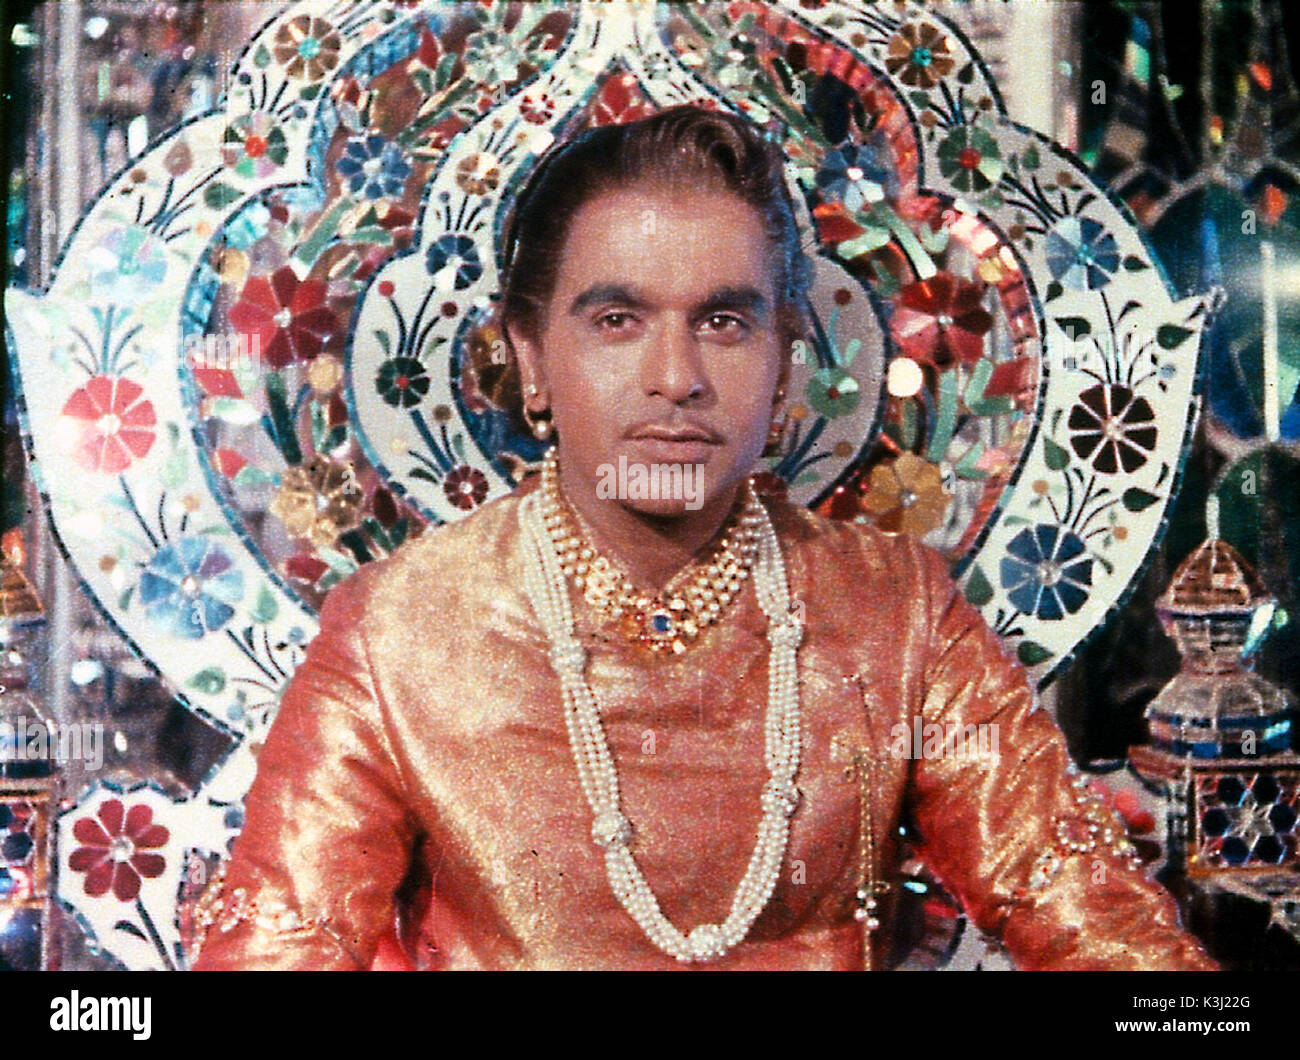 Mughal-E-Azam Dir K. Asif / 173 mins / colour & b&w / cert tbc Starring Dilip Kumar, Madhubala, Prithviraj Kapoor Opening venues NFT Cineworld Feltham and Wood Green COPYRIGHT NOTICE - Image courtesy of British Film Institute. Permission granted solely for reproduction in newspapers and other periodicals, TV and new media, in connection with any current or forthcoming British Film Institute release or Stock Photo